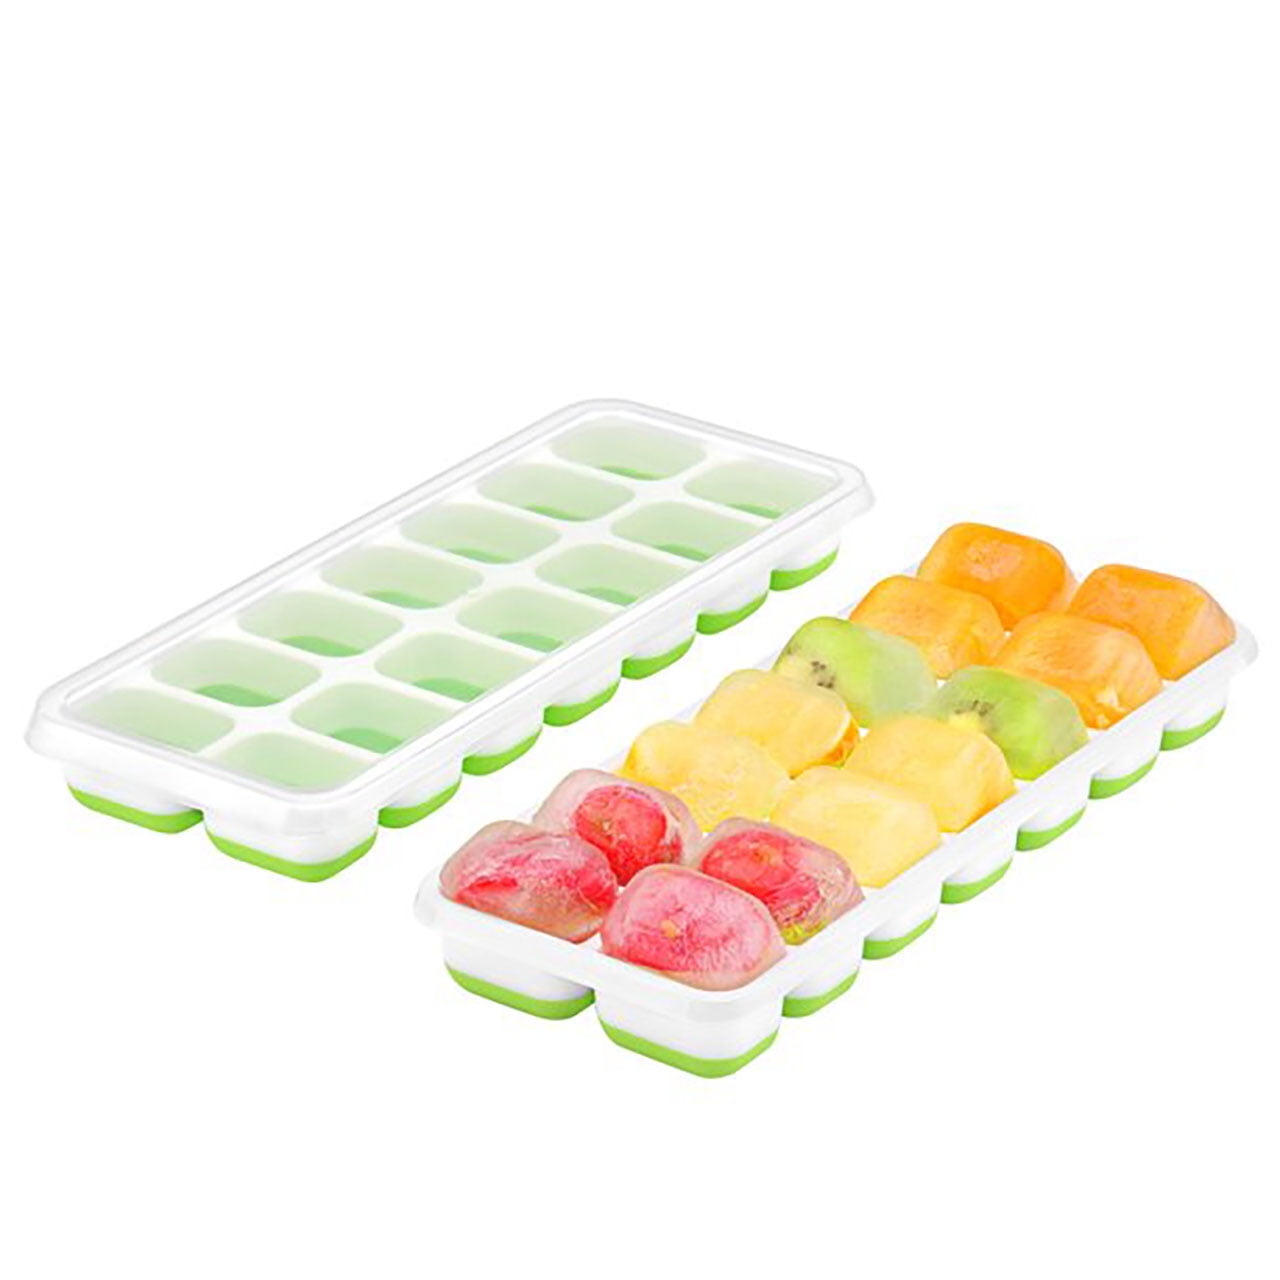 OMorc Ice Cube Trays 3 Pack Easy-Release 2 Ice Ball and 1 Ice Cube Maker Molds 